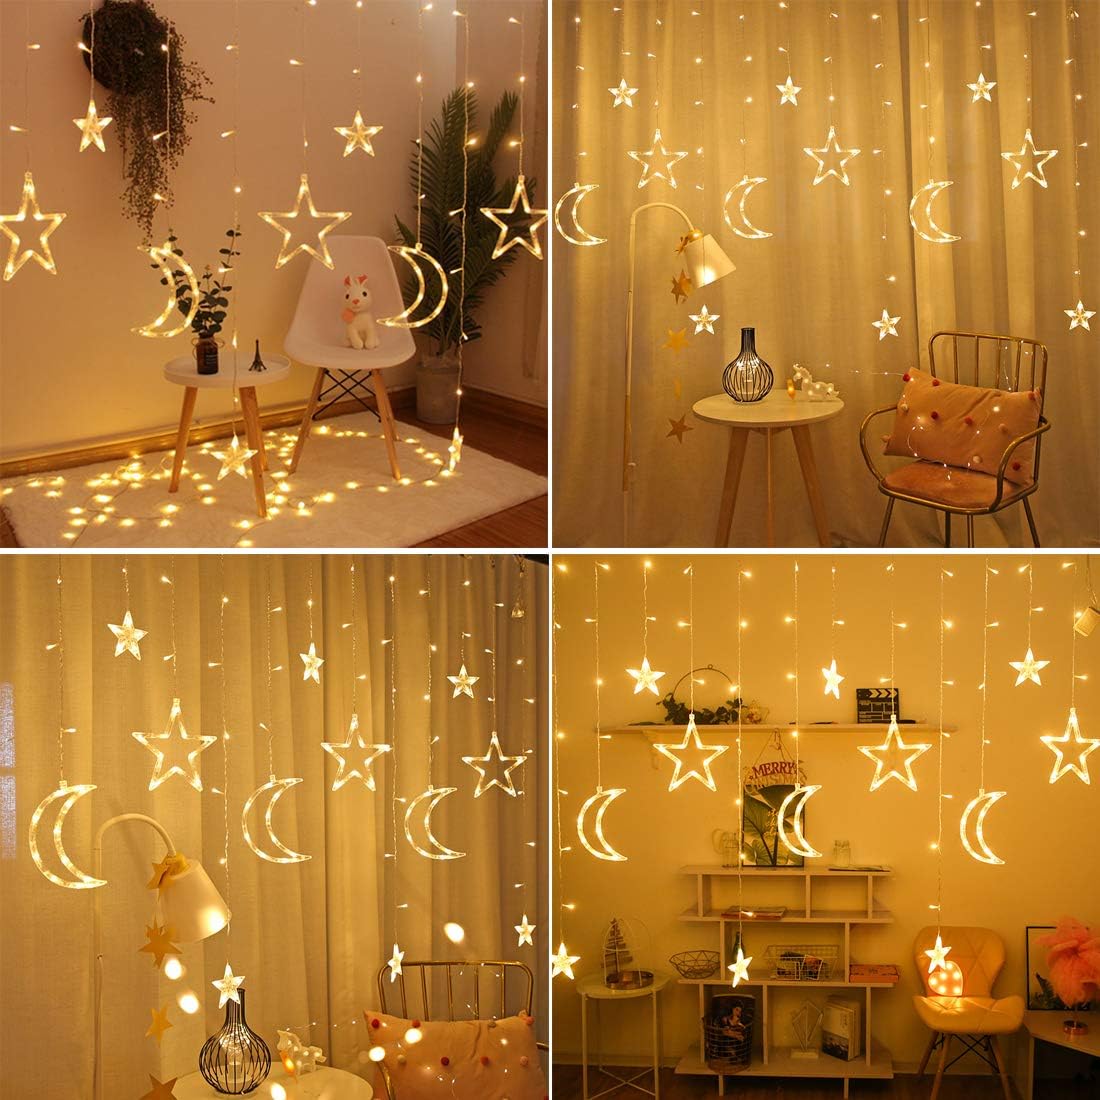 Golden Decorative Lights Curtain in The Shape of a Crescent and Stars - 3M